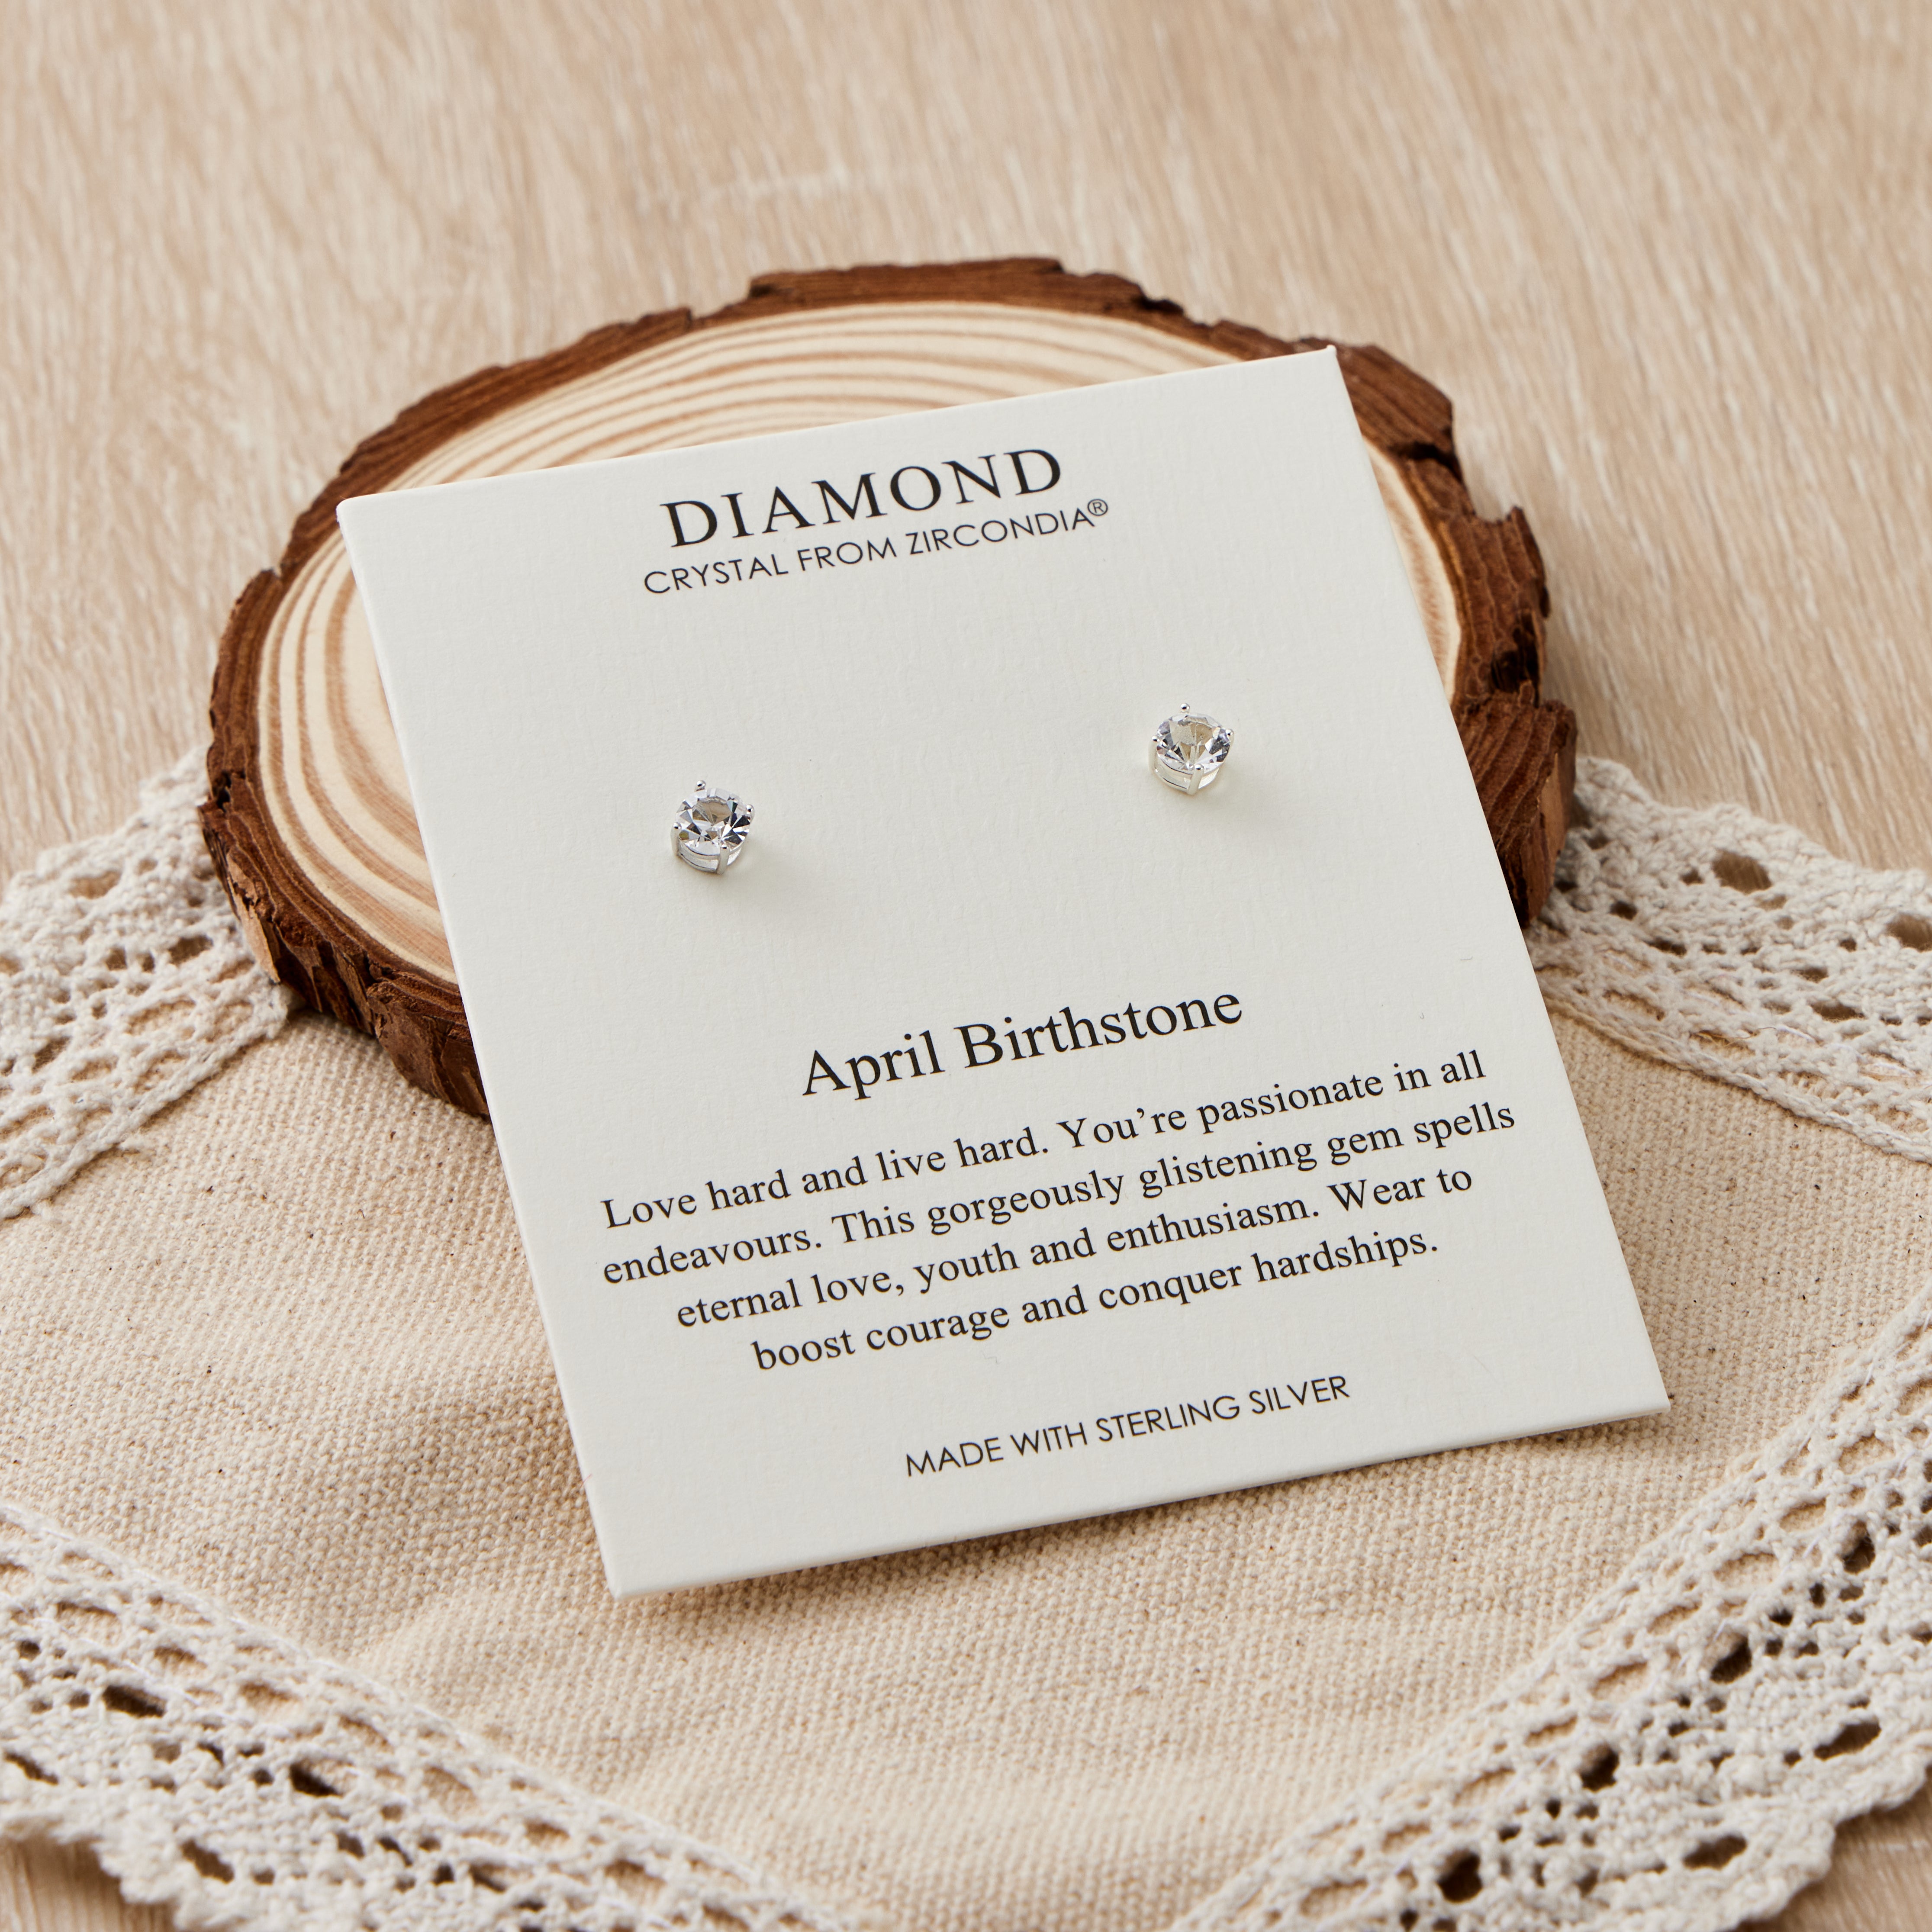 Sterling Silver April (Diamond) Birthstone Earrings Created with Zircondia® Crystals